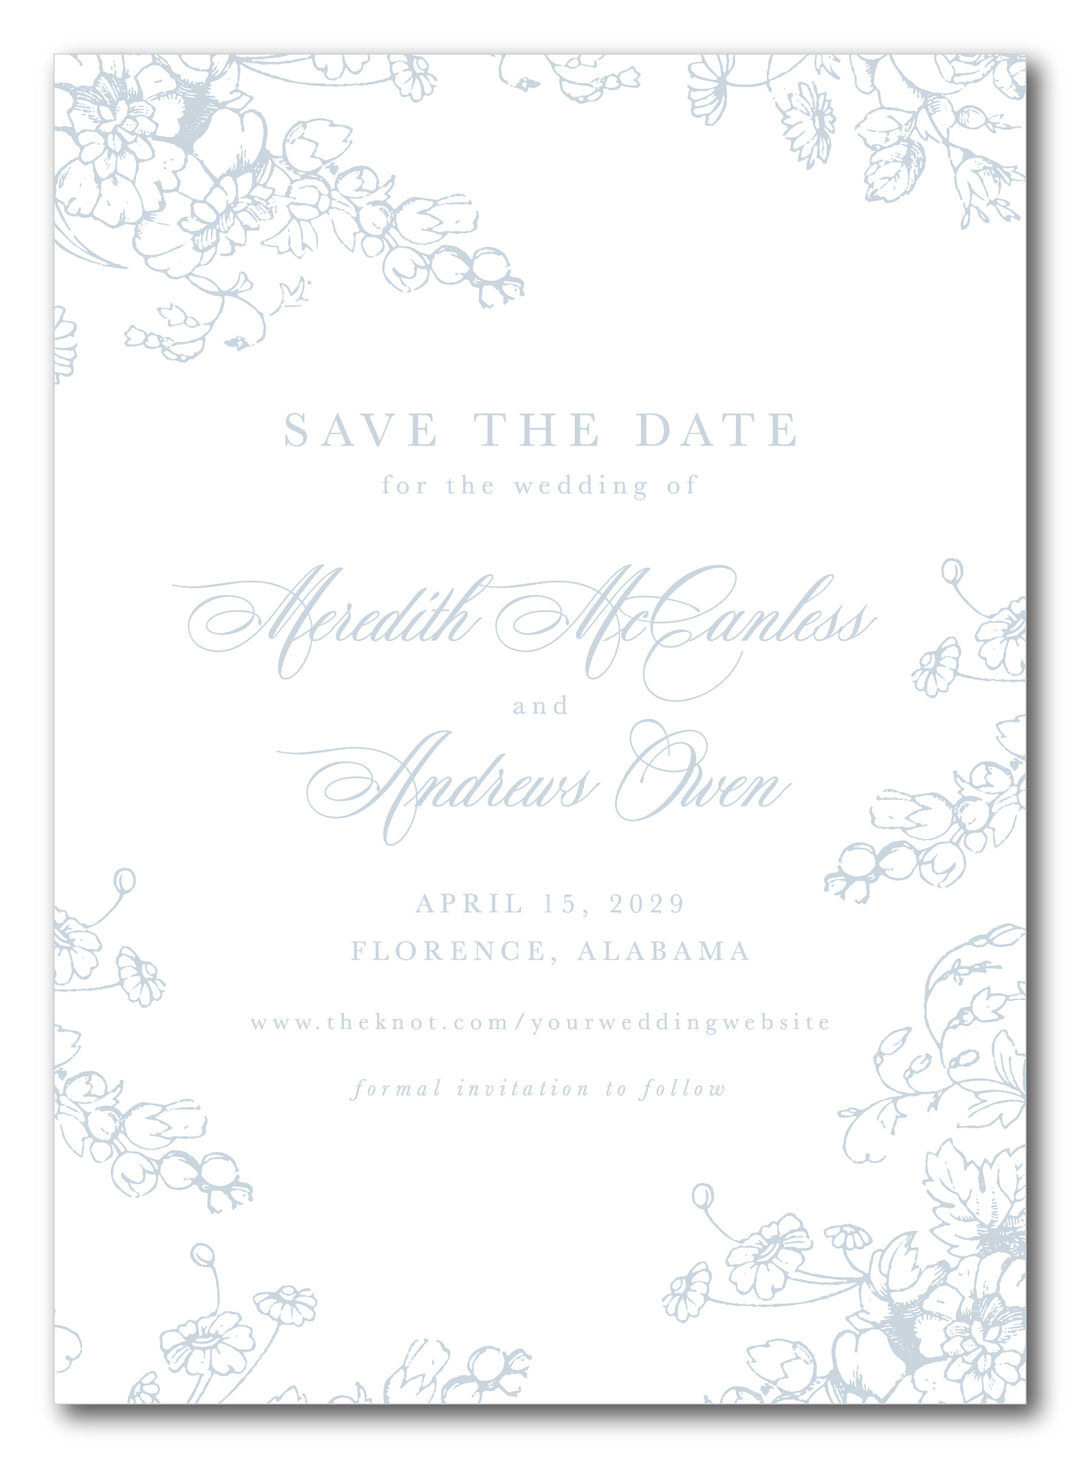 The Meredith Save The Date